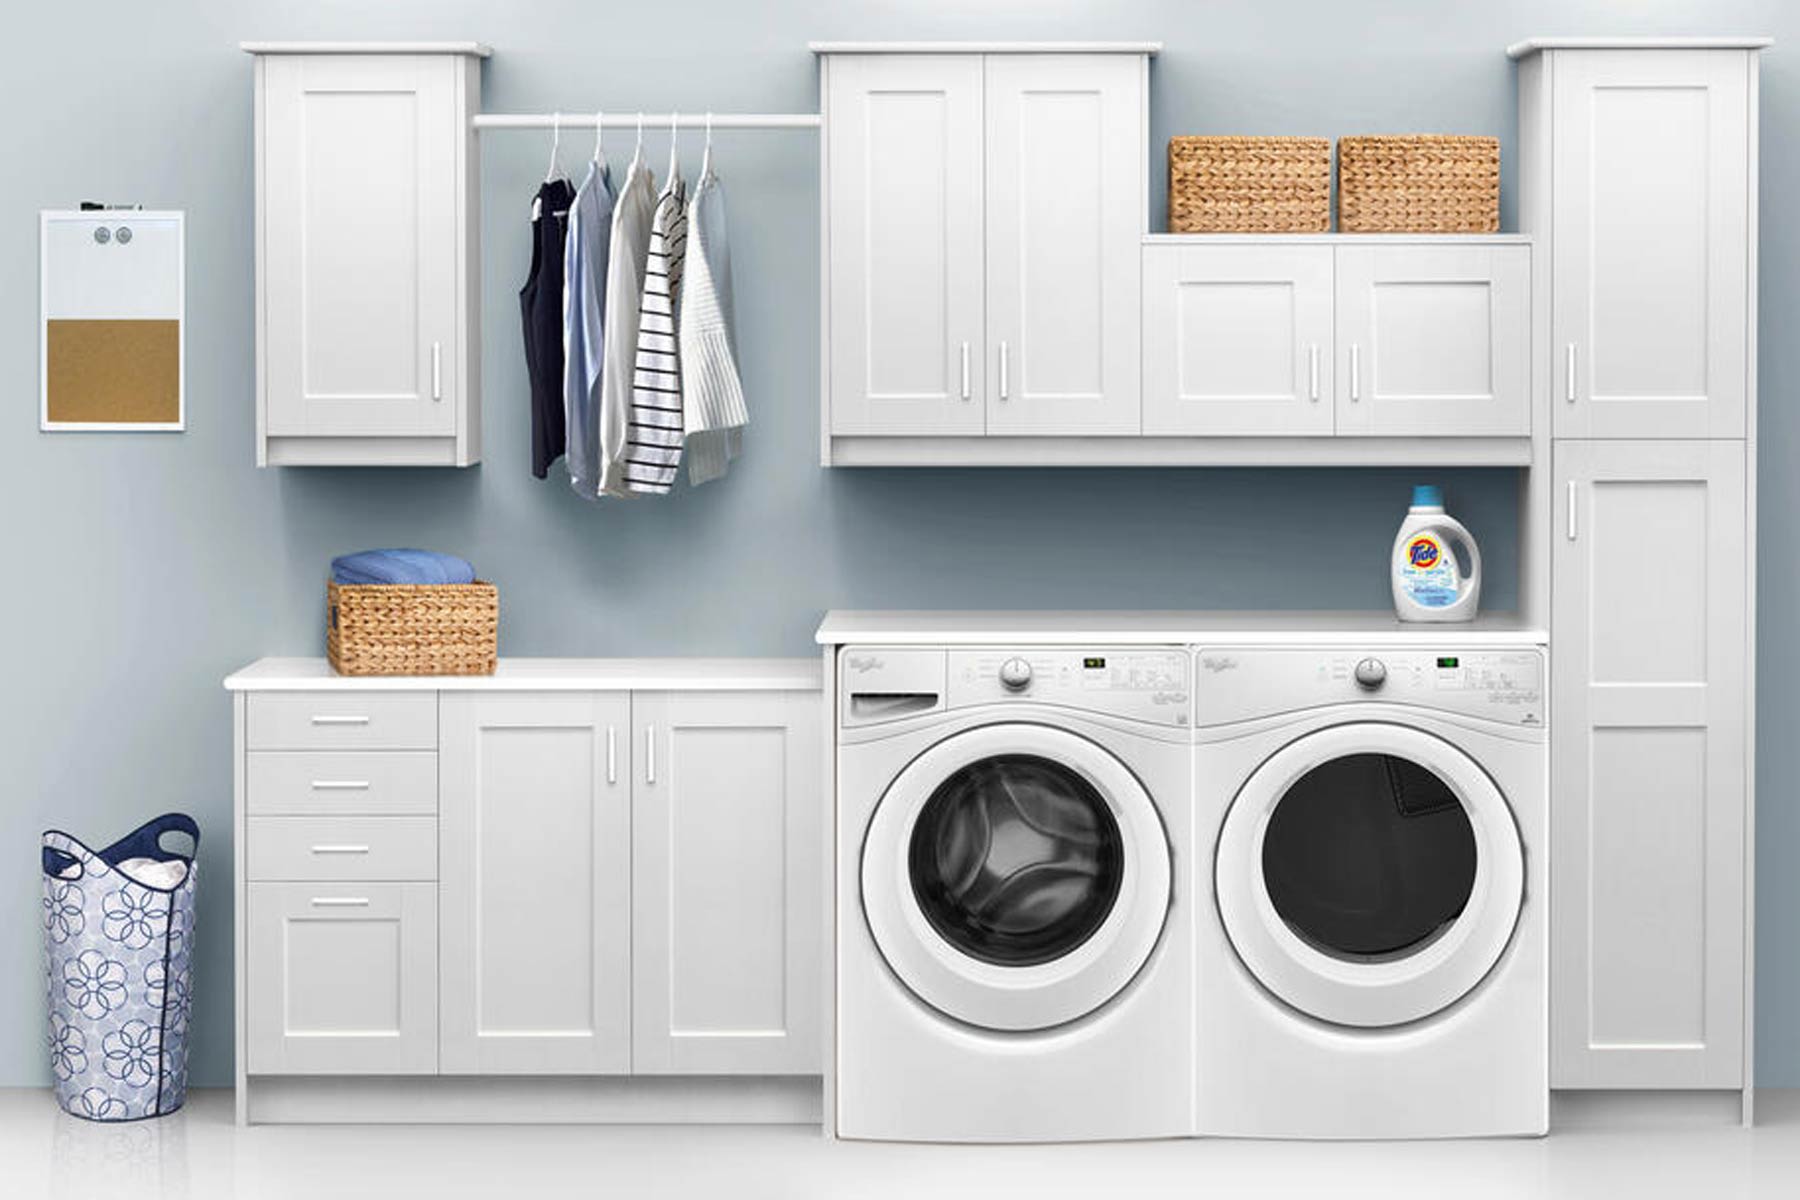 How much does it cost to move washer and dryer hookups?